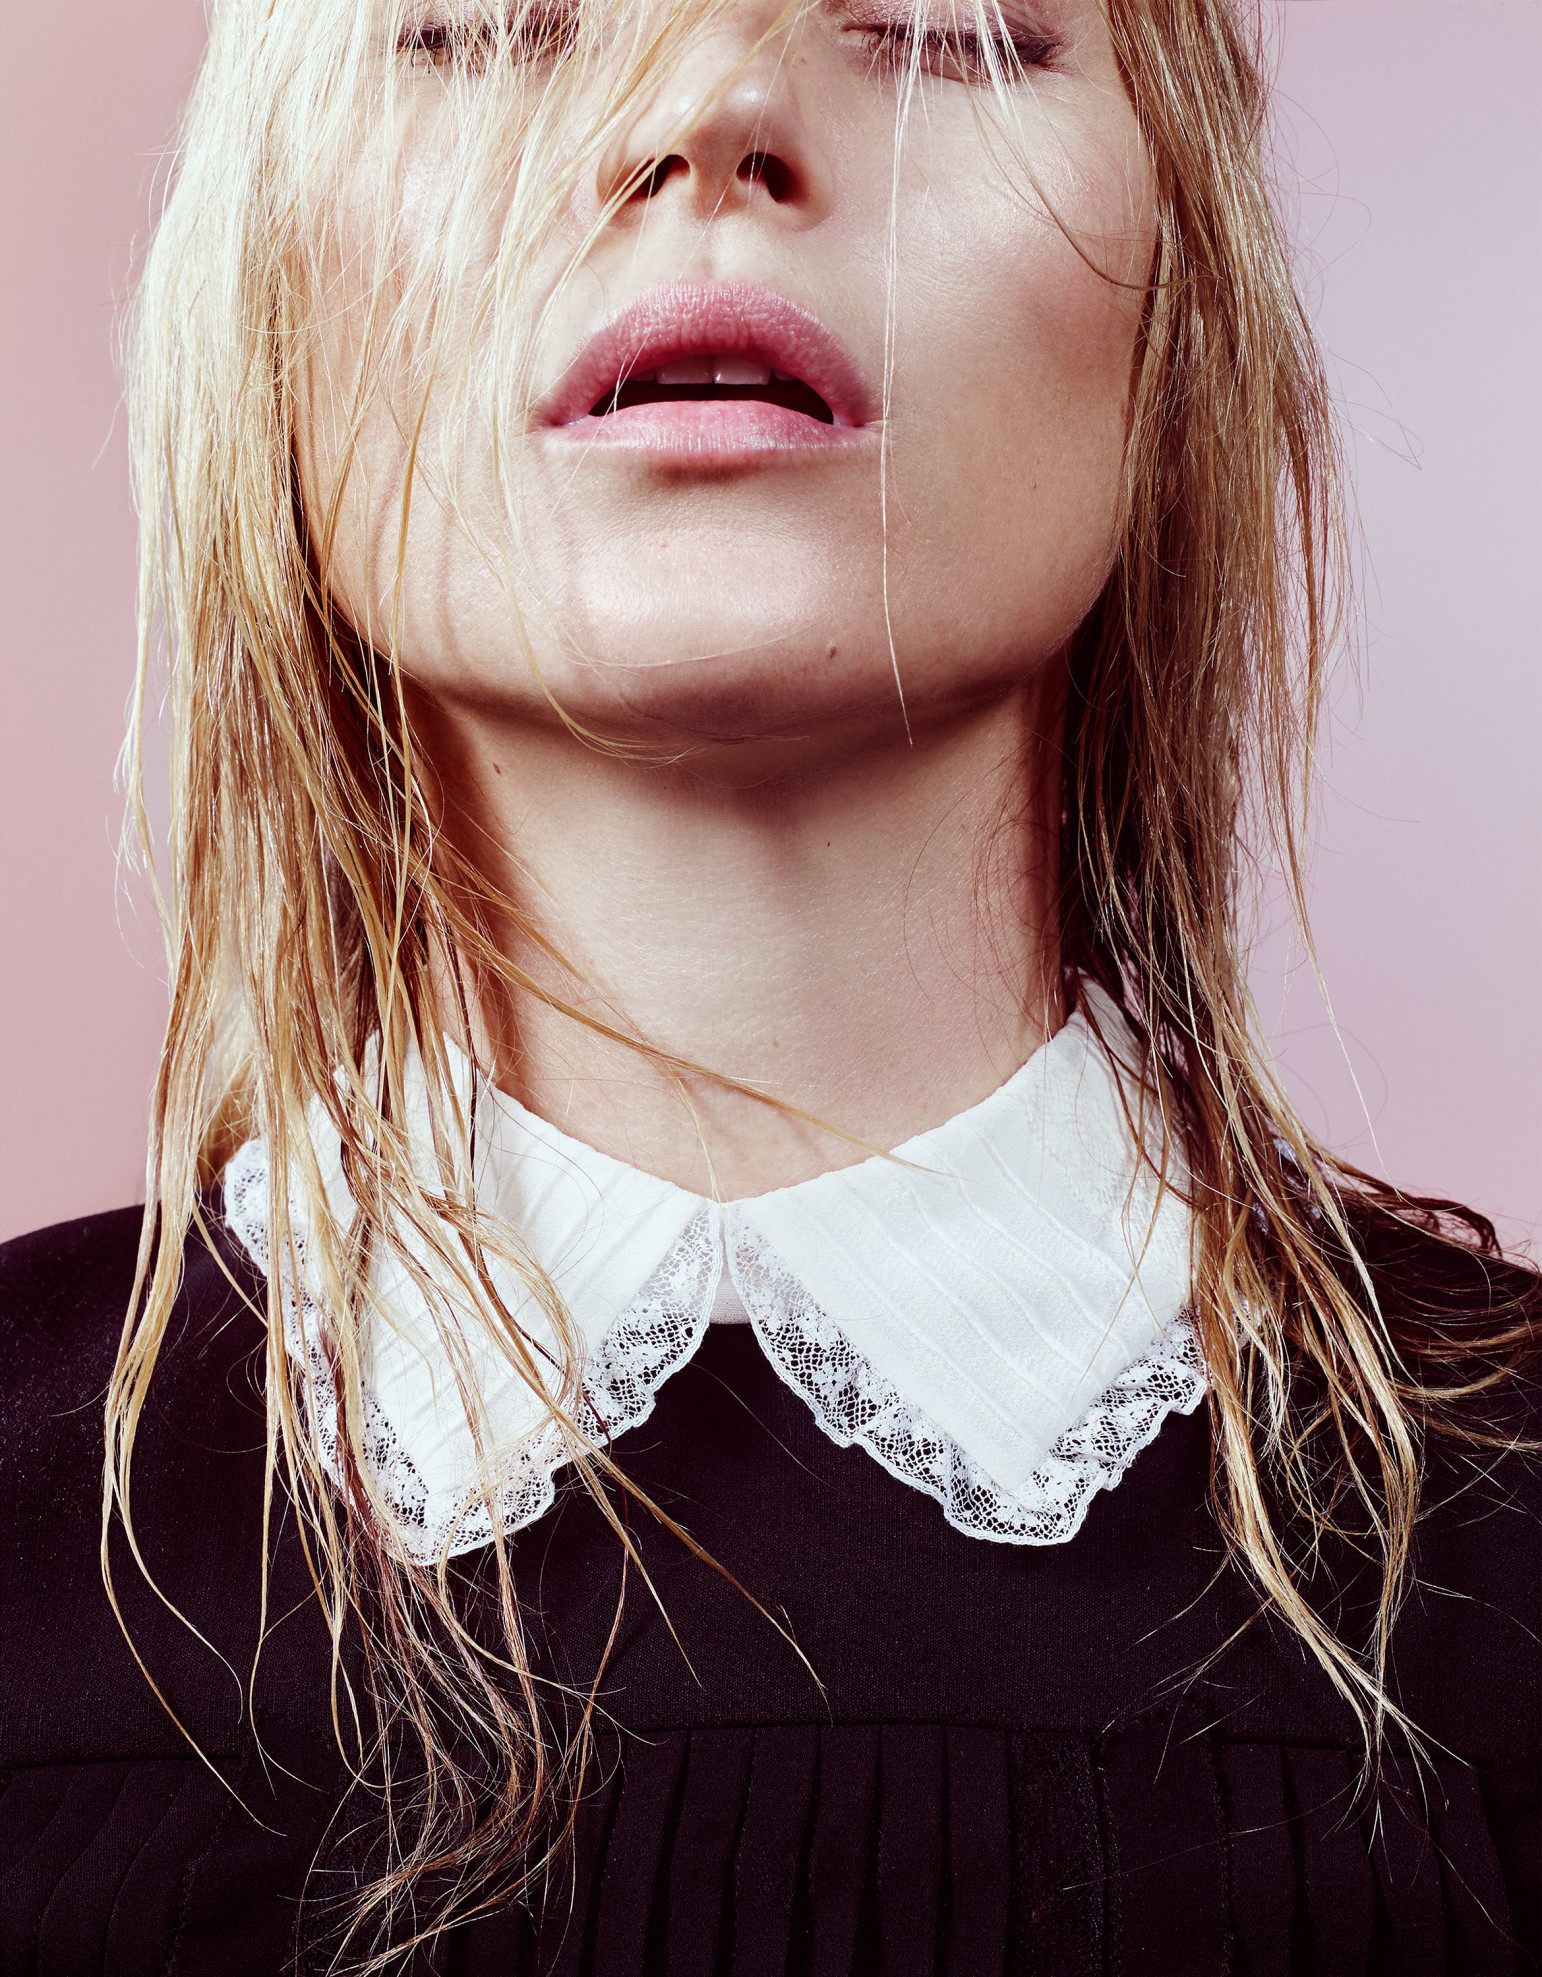 kate-moss-a-piece-of-kate-craig-mc-dean-may-2015-w-magazine-01